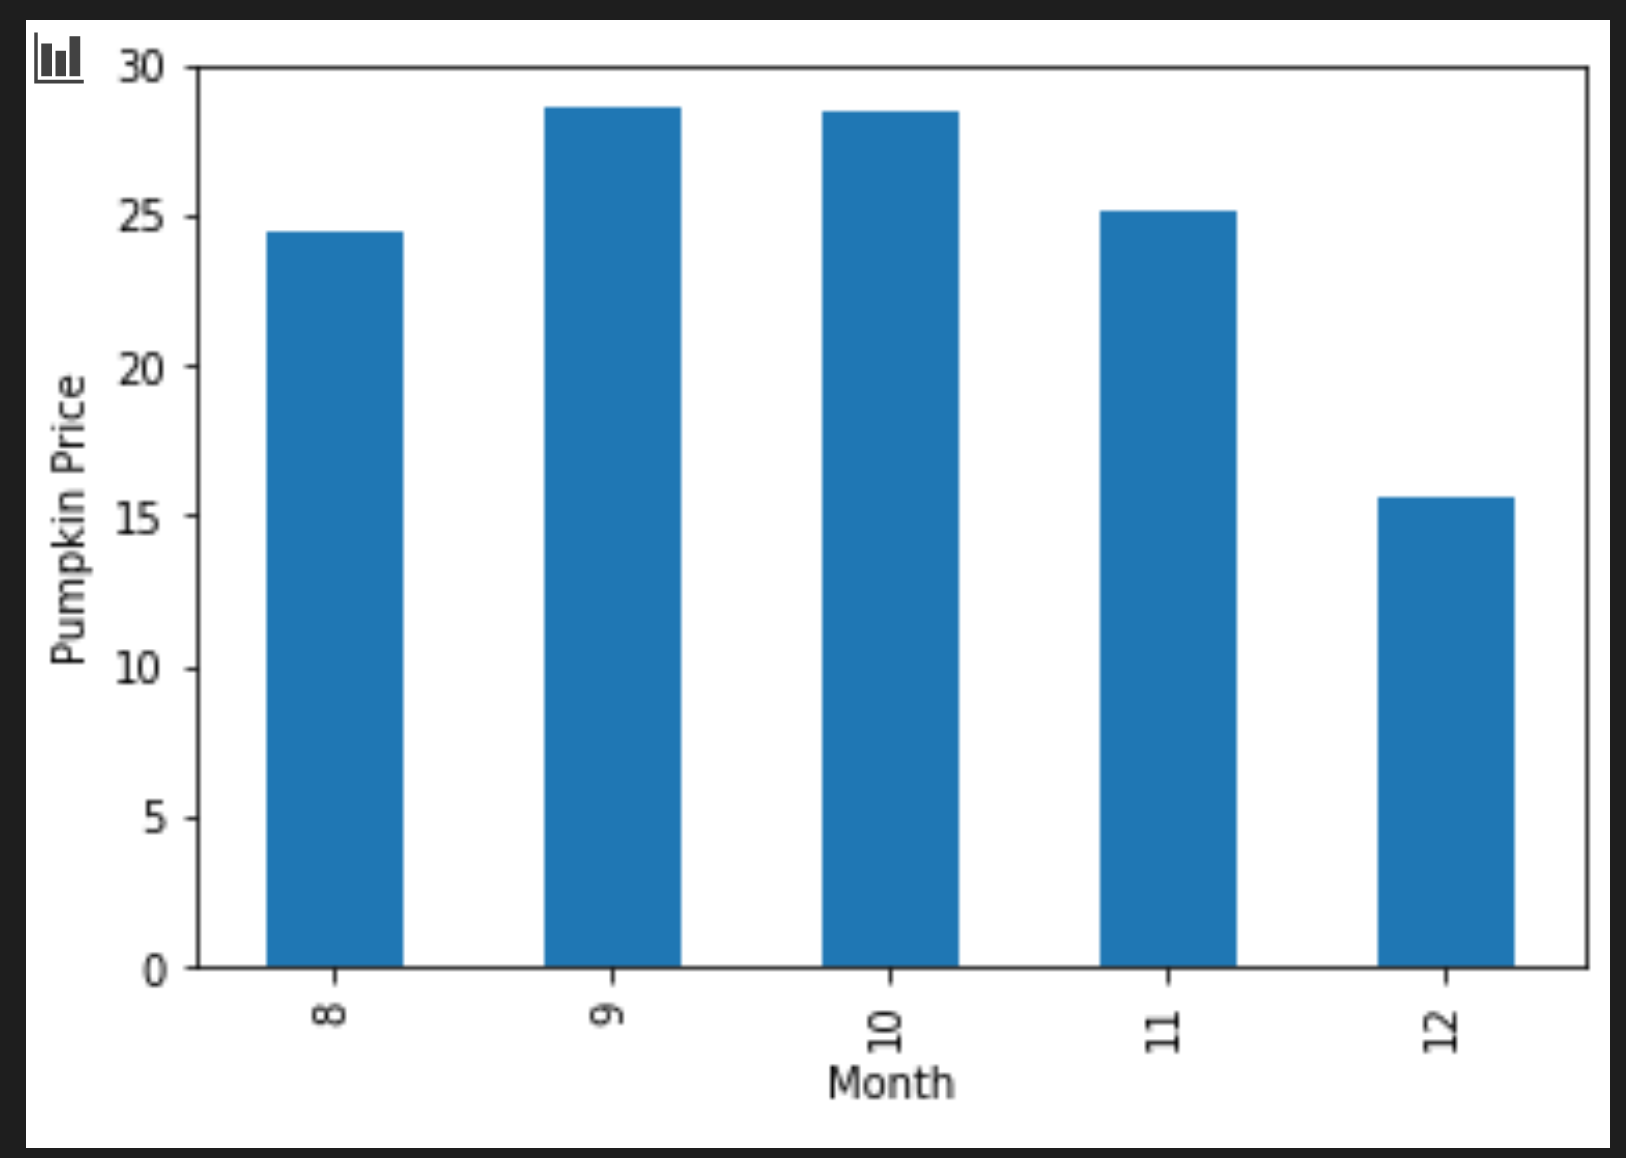 A bar chart showing price to month relationship